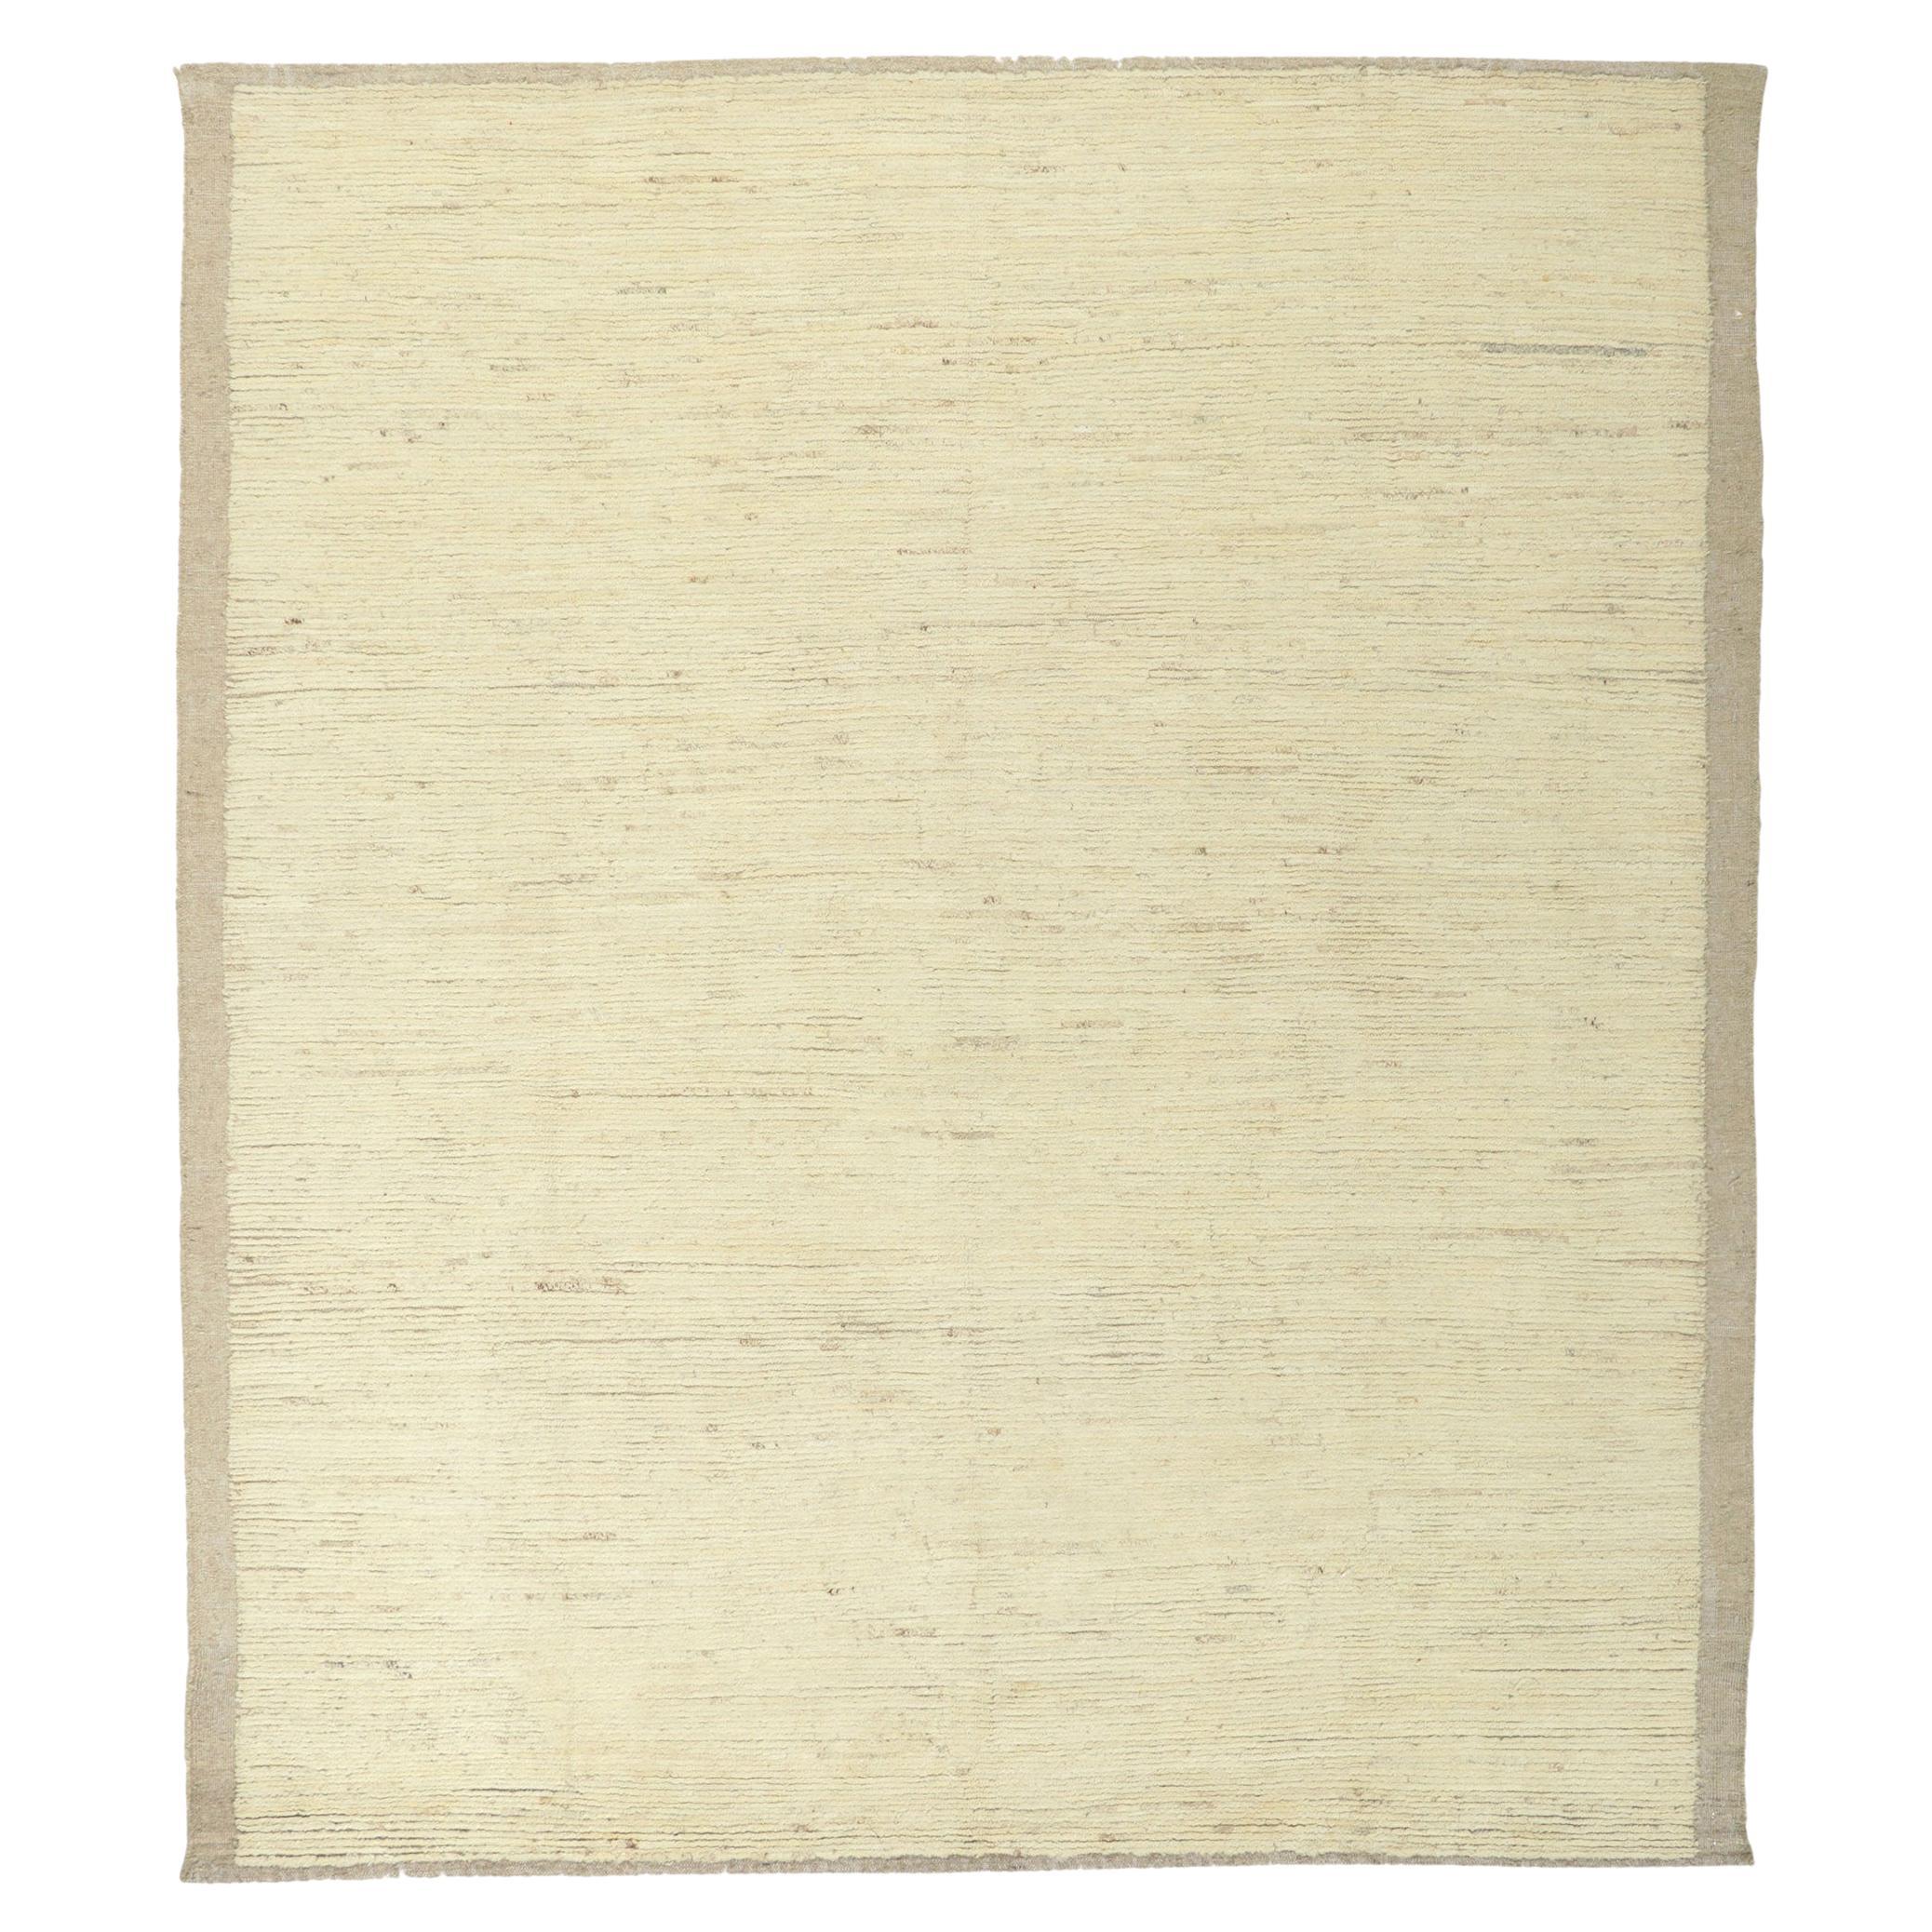 New Contemporary Moroccan Rug with Short Pile Minimalist Style For Sale